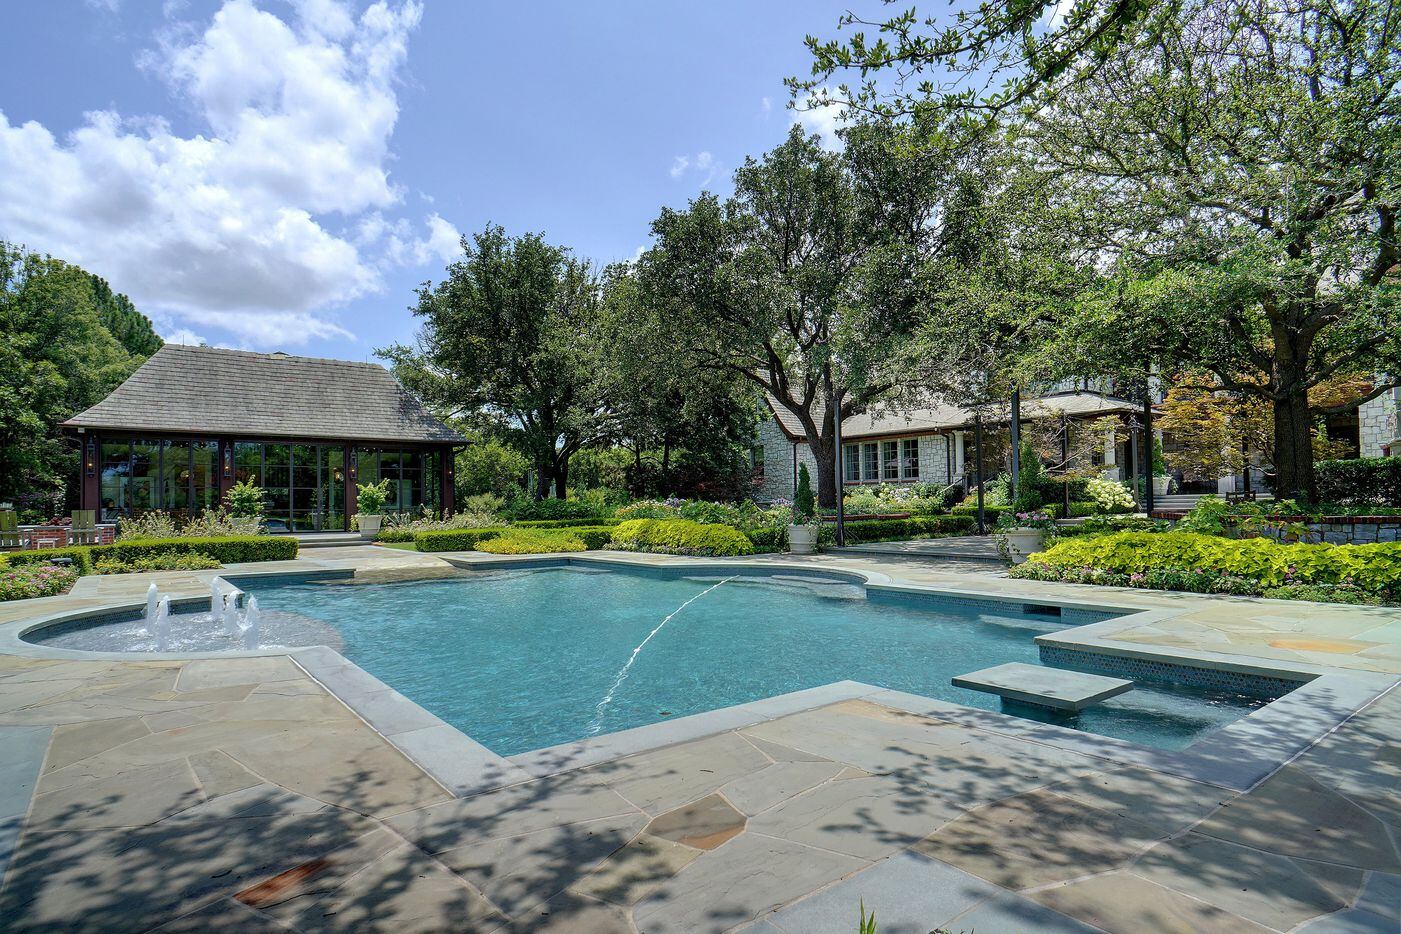 The property at 6401 Westcoat Drive in Colleyville has an abundance of outdoor entertaining...